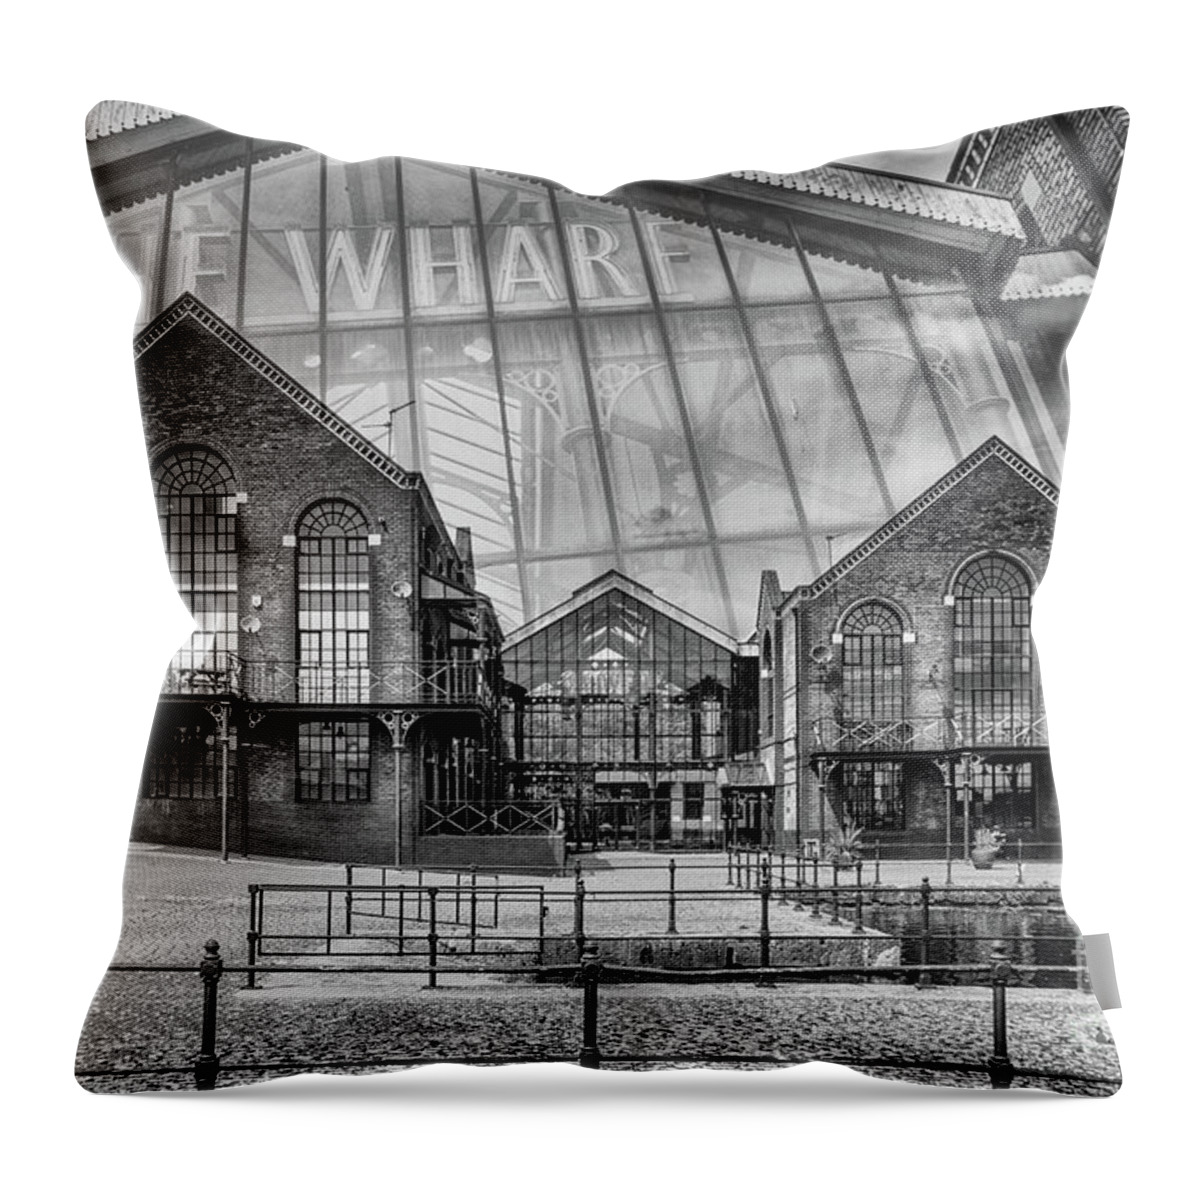 The Wharf Throw Pillow featuring the photograph The Wharf Cardiff Bay Mono by Steve Purnell